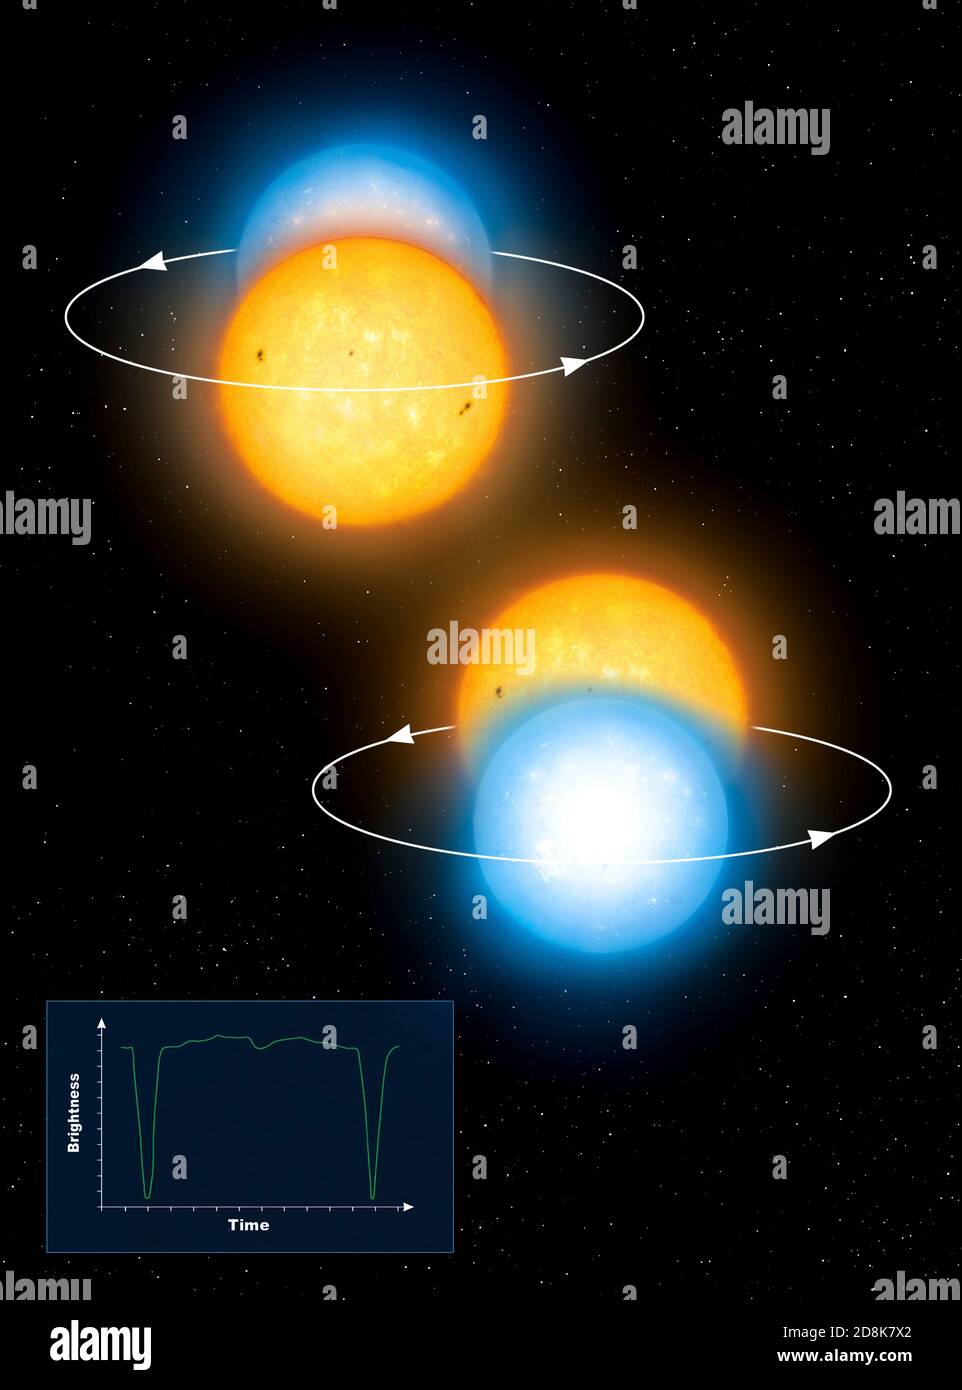 Illustration of the eclipsing binary star systems known as Algols. Algol is the prototype of eclipsing binary variable stars, in which two stars in mutual orbit periodically cut out each other's light as seen from Earth. Algol itself comprises a cool orange star and a hot white star. Stock Photo